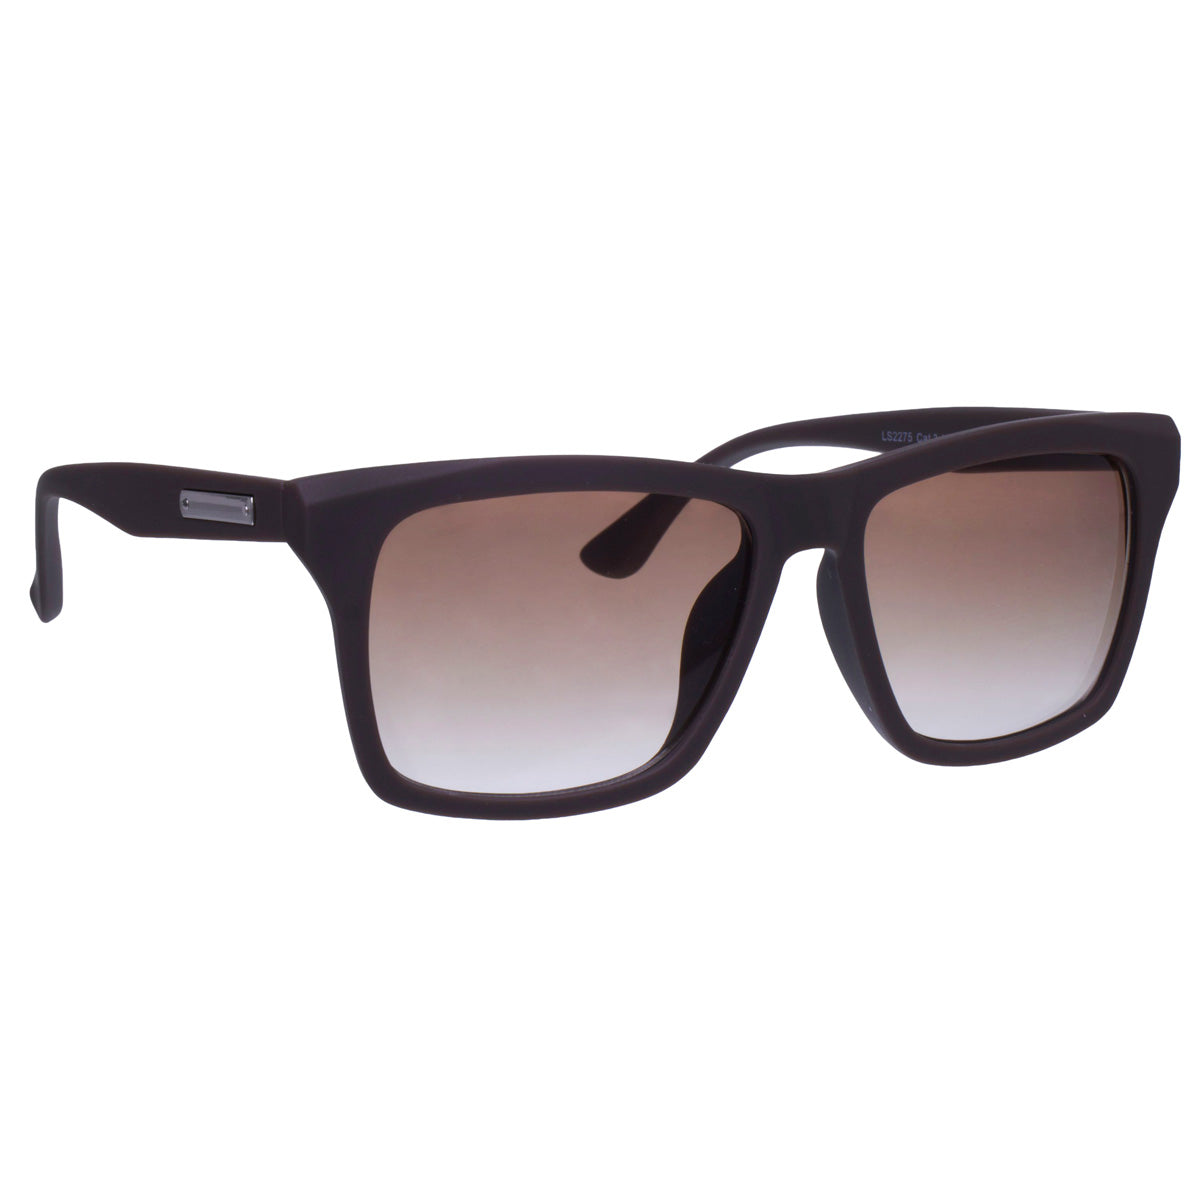 Classic sunglasses with decorative buckles